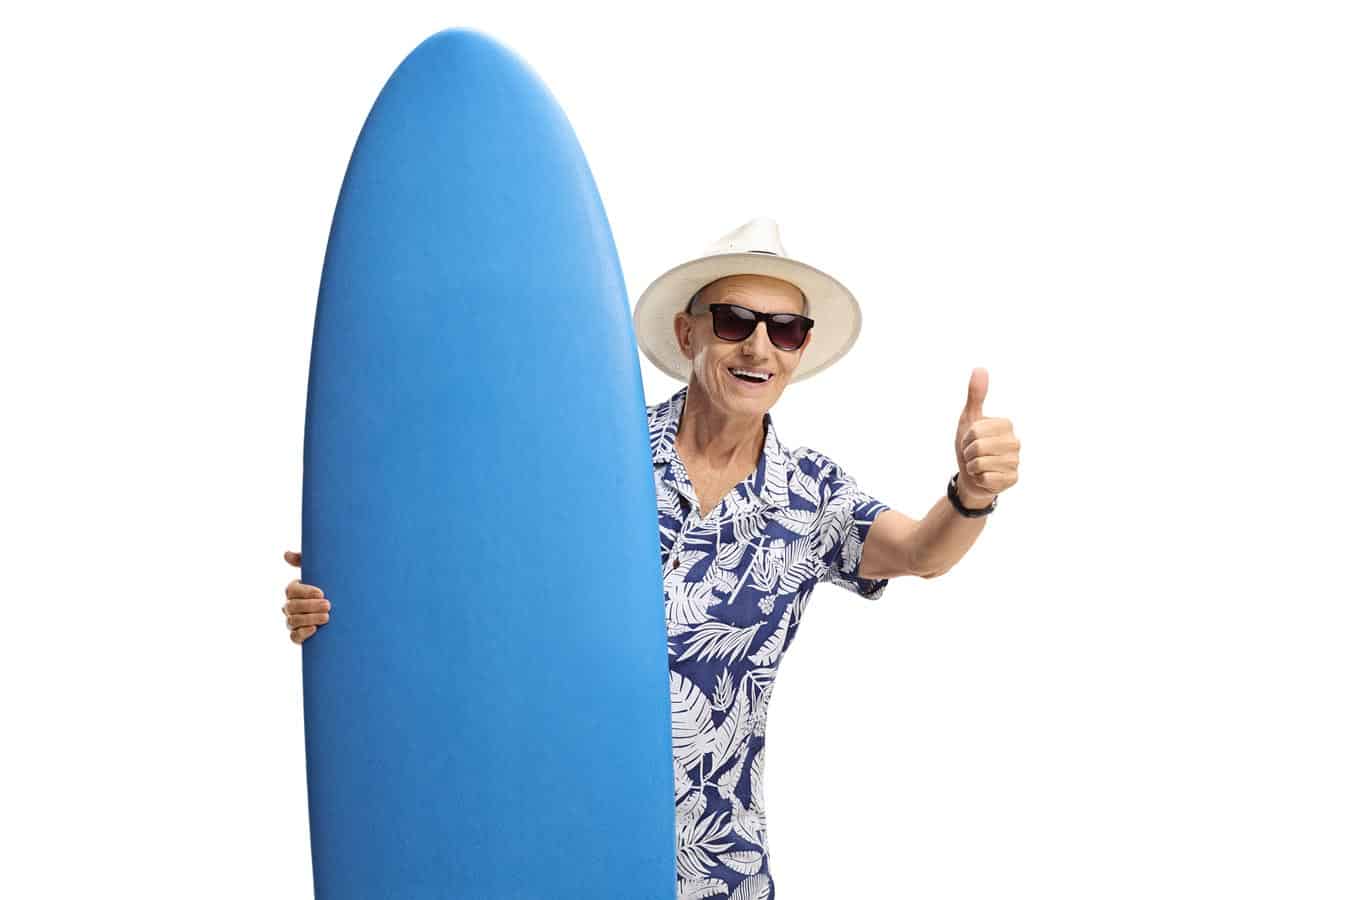 legally-getting-rid-of-a-timeshare-contract-the-first-time-so-you-can-enjoy-your-vacation-and-riding-waves-on-new-blue-surfboard-even-at-an-old-age